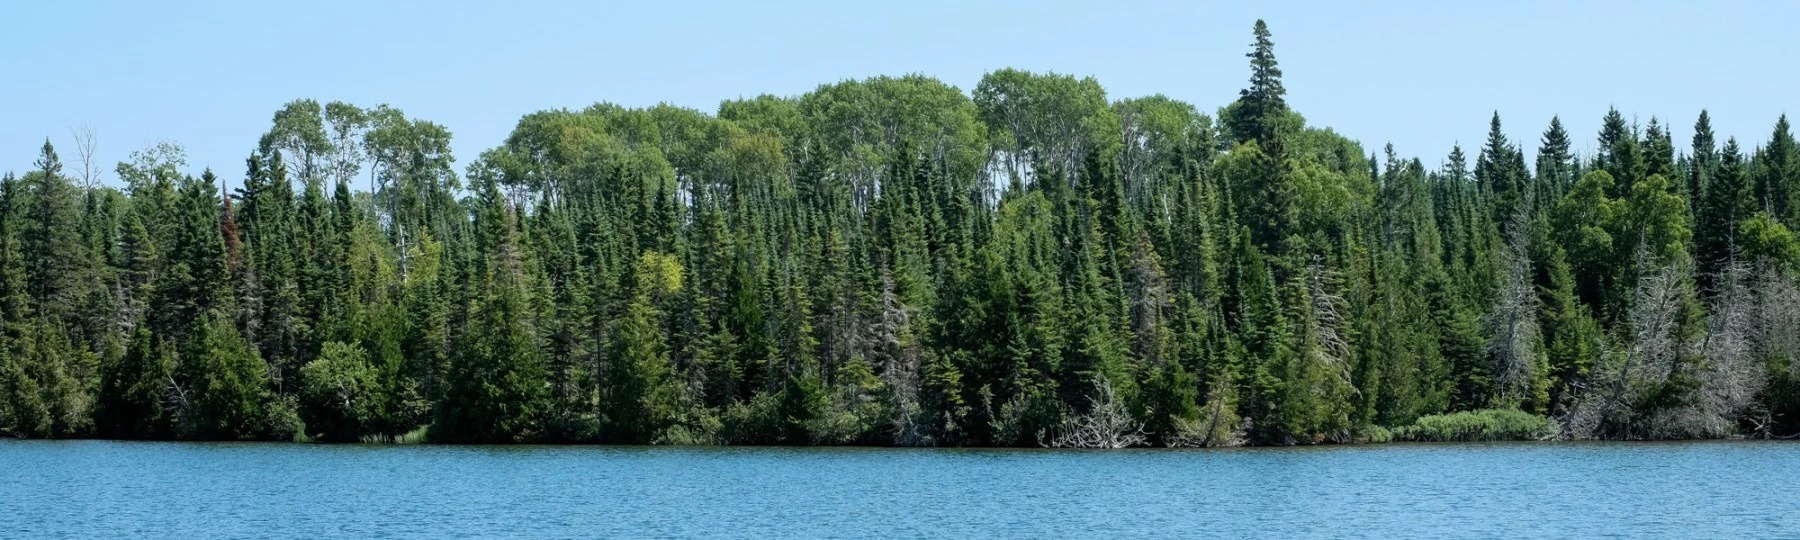 View of the tree-lined shore from the lake